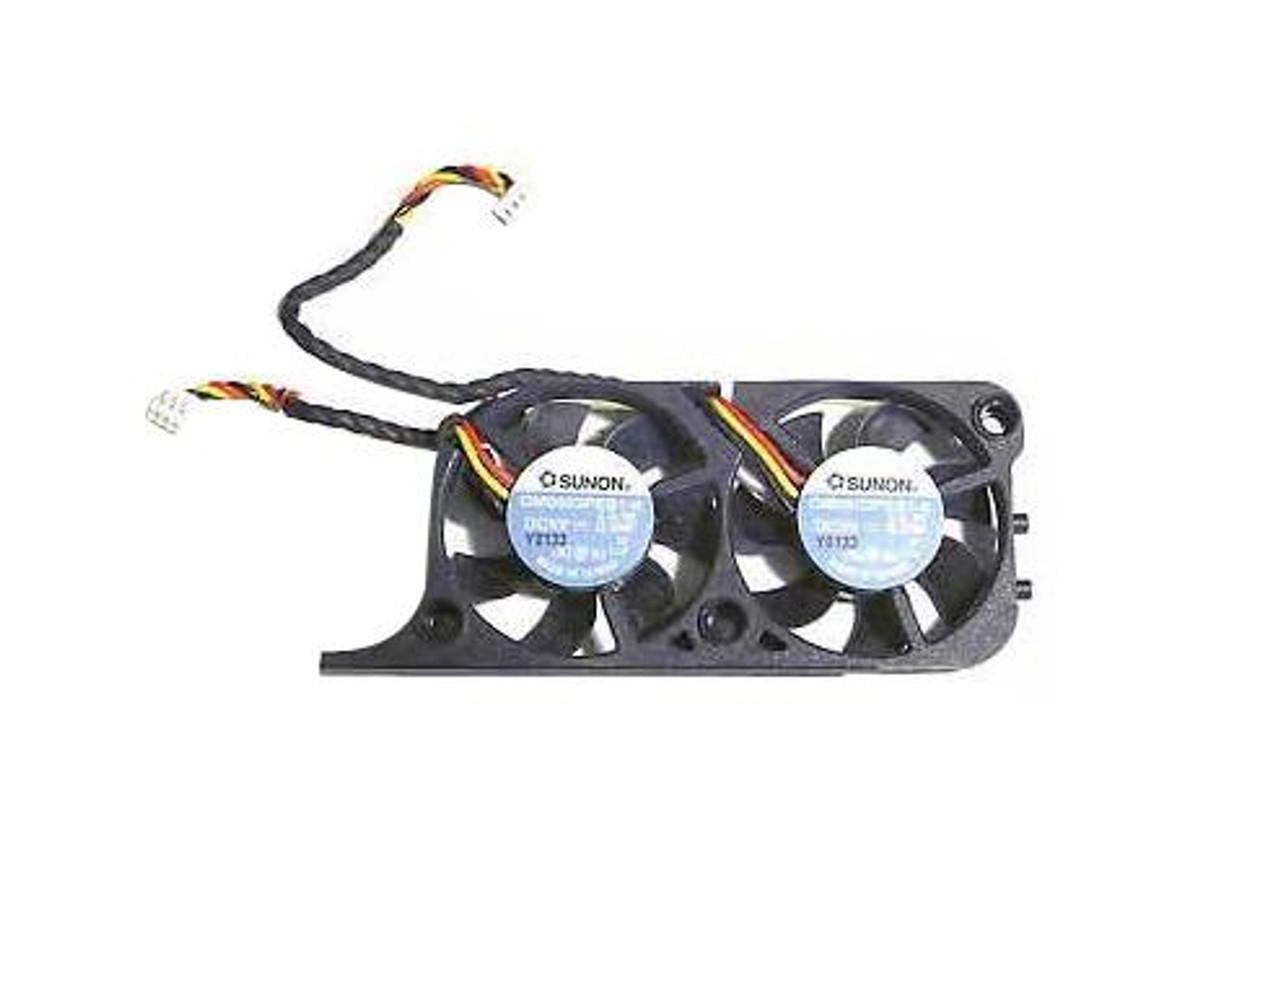 6F858 Dell CPU Cooling Fan And Heatsink for Inspiron 8200 Latitude C840